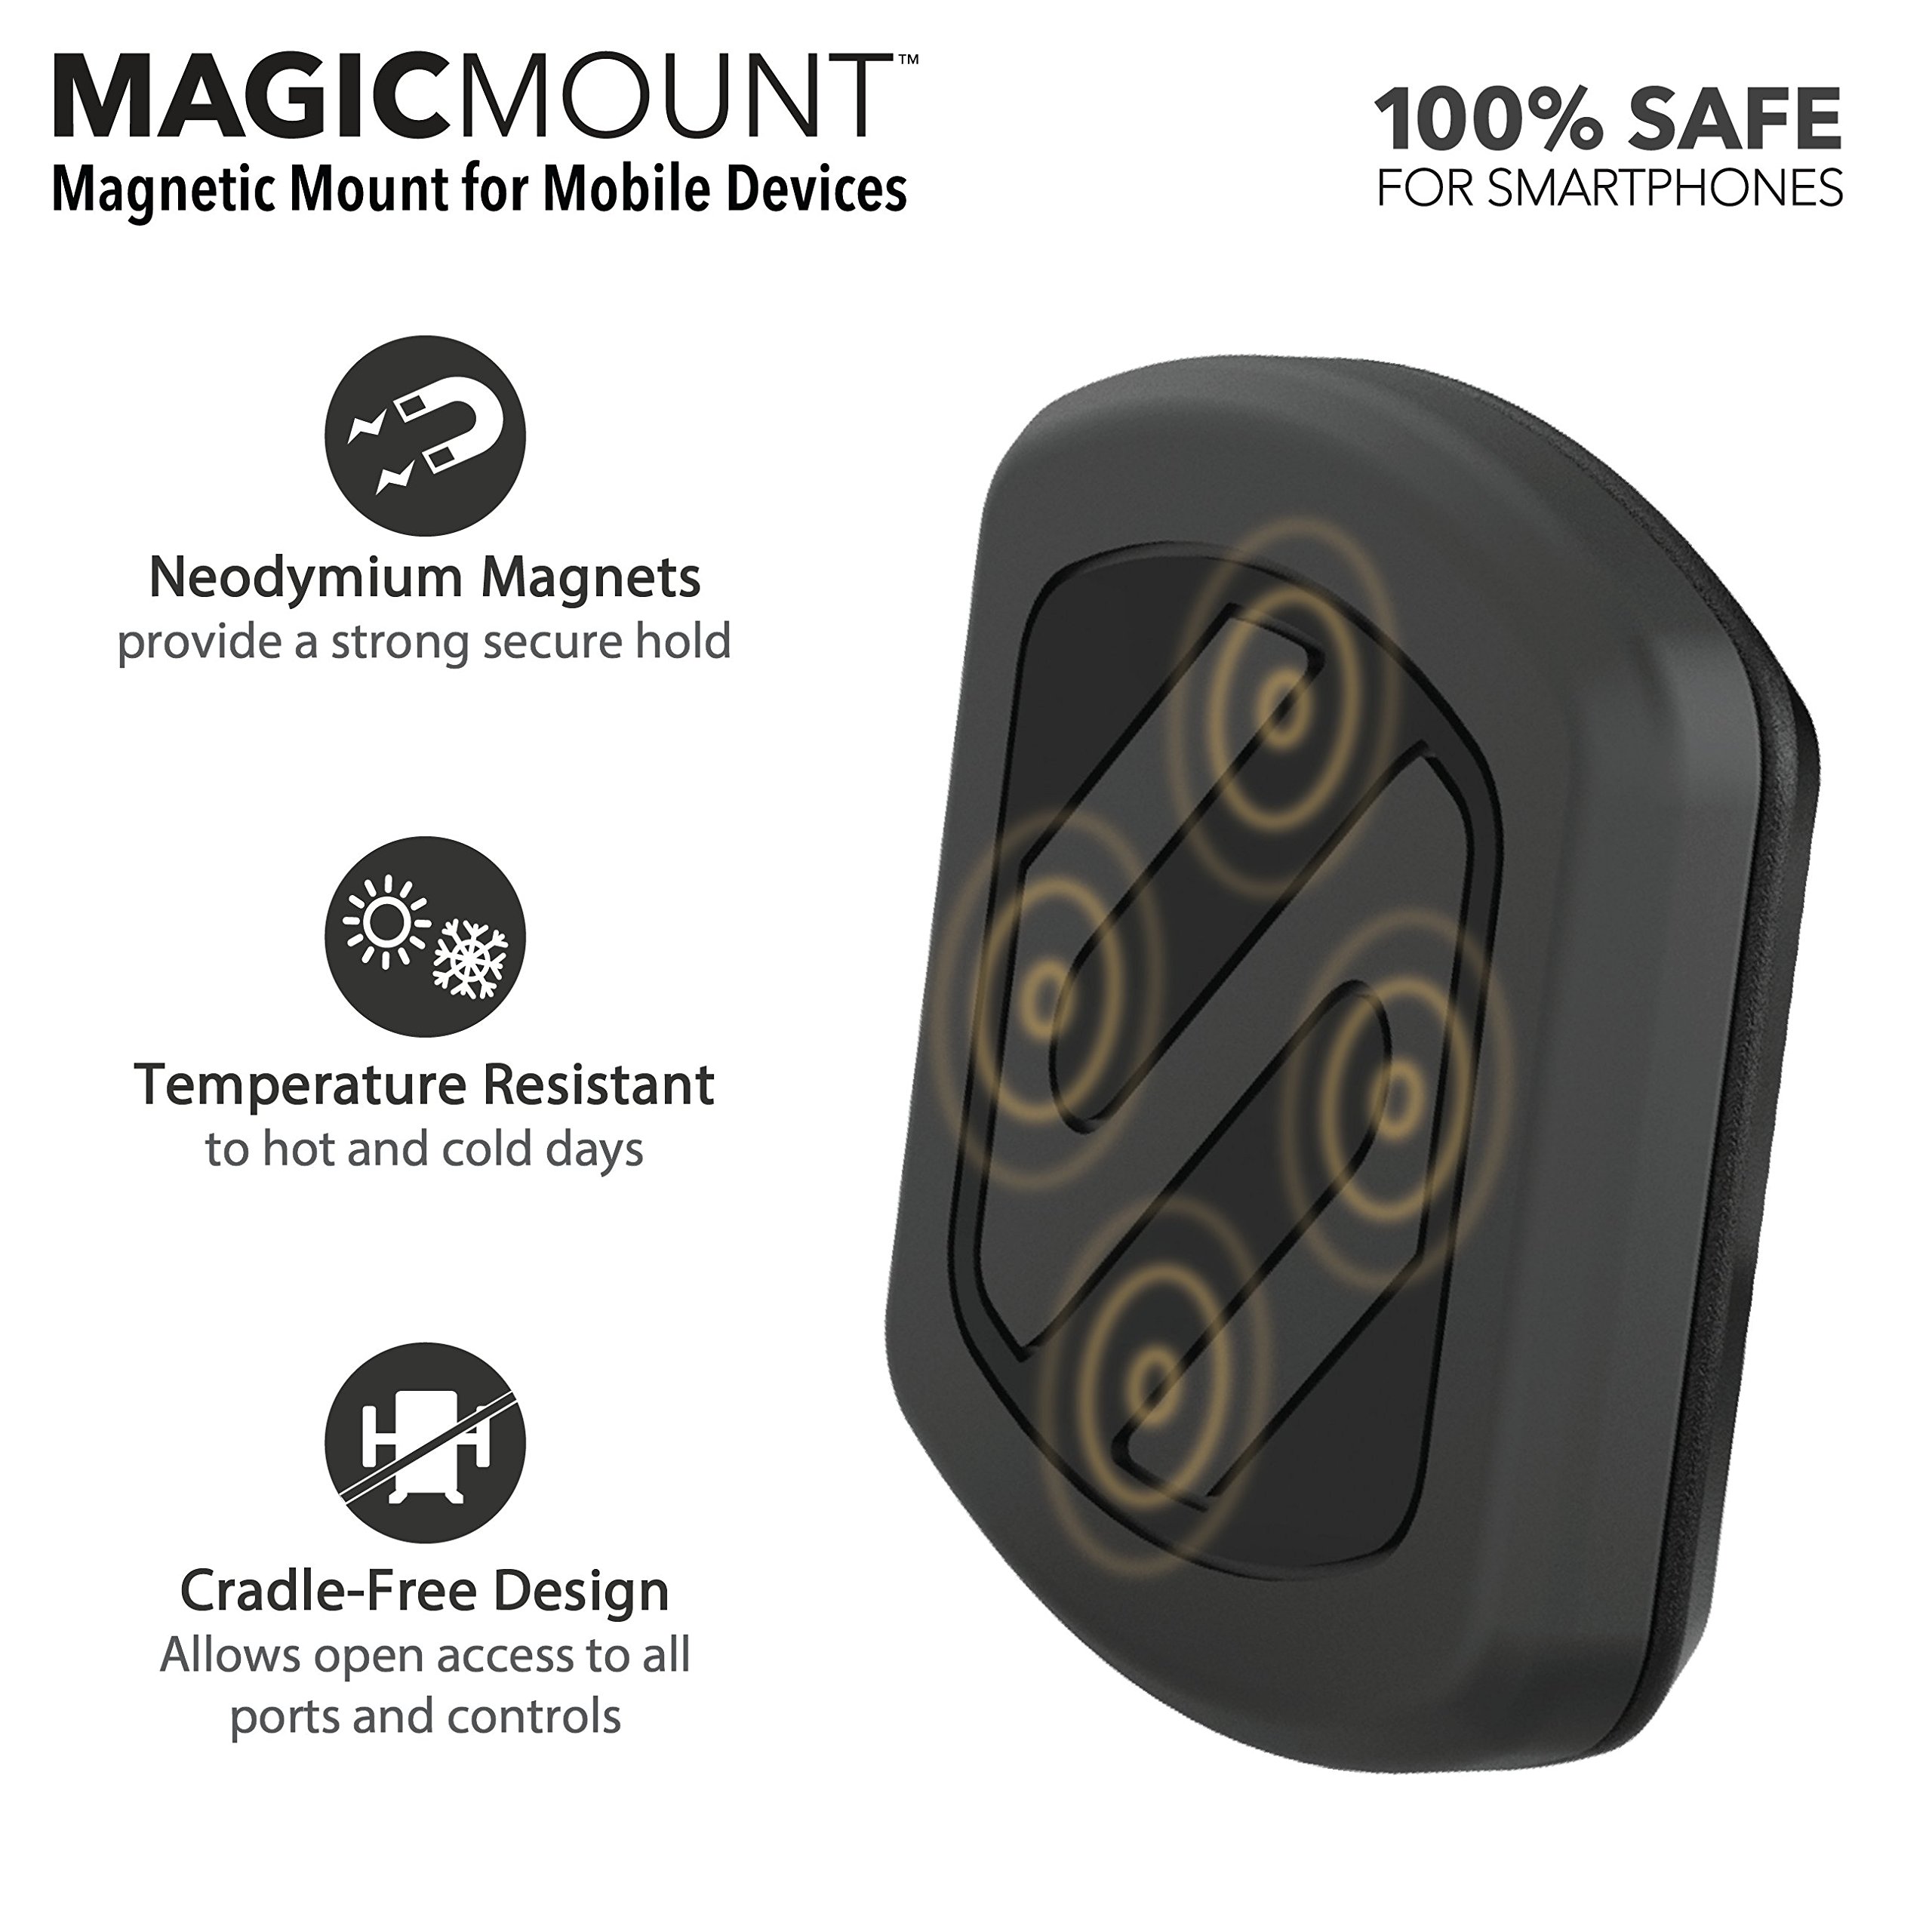 Scosche MAGFMB MagicMount Flush Magnetic Car Mount, Universal Cell Phone Holder for Car Dashboard and Flat Surfaces, Easy Magnet Mounting for iPhone, iPad, Smartphones, Tablets, and More